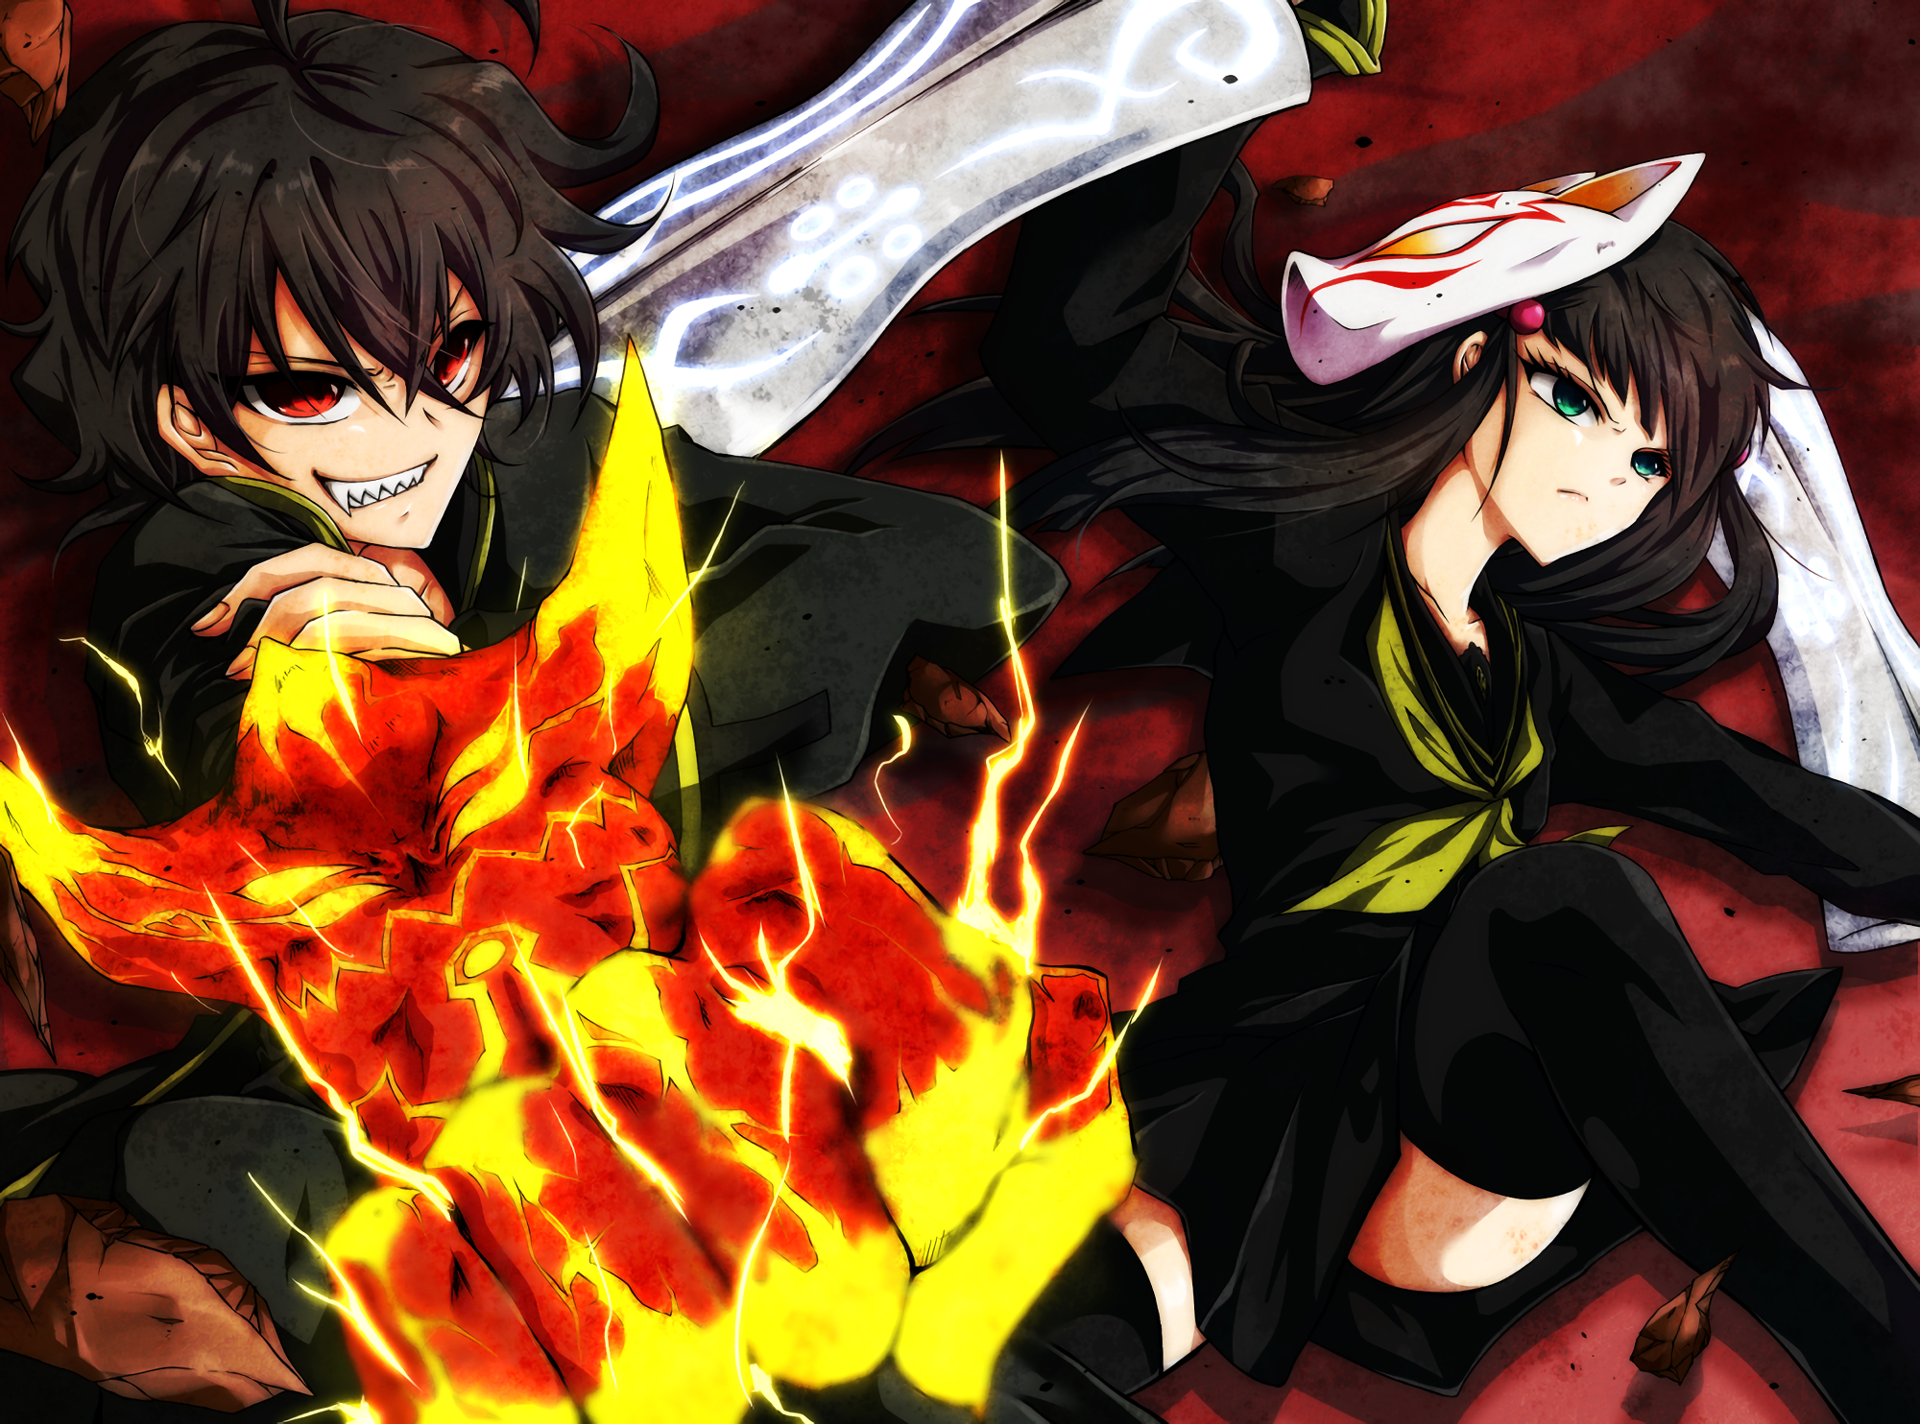 39 Twin Star Exorcists Hd Wallpapers Background Images Wallpaper Abyss